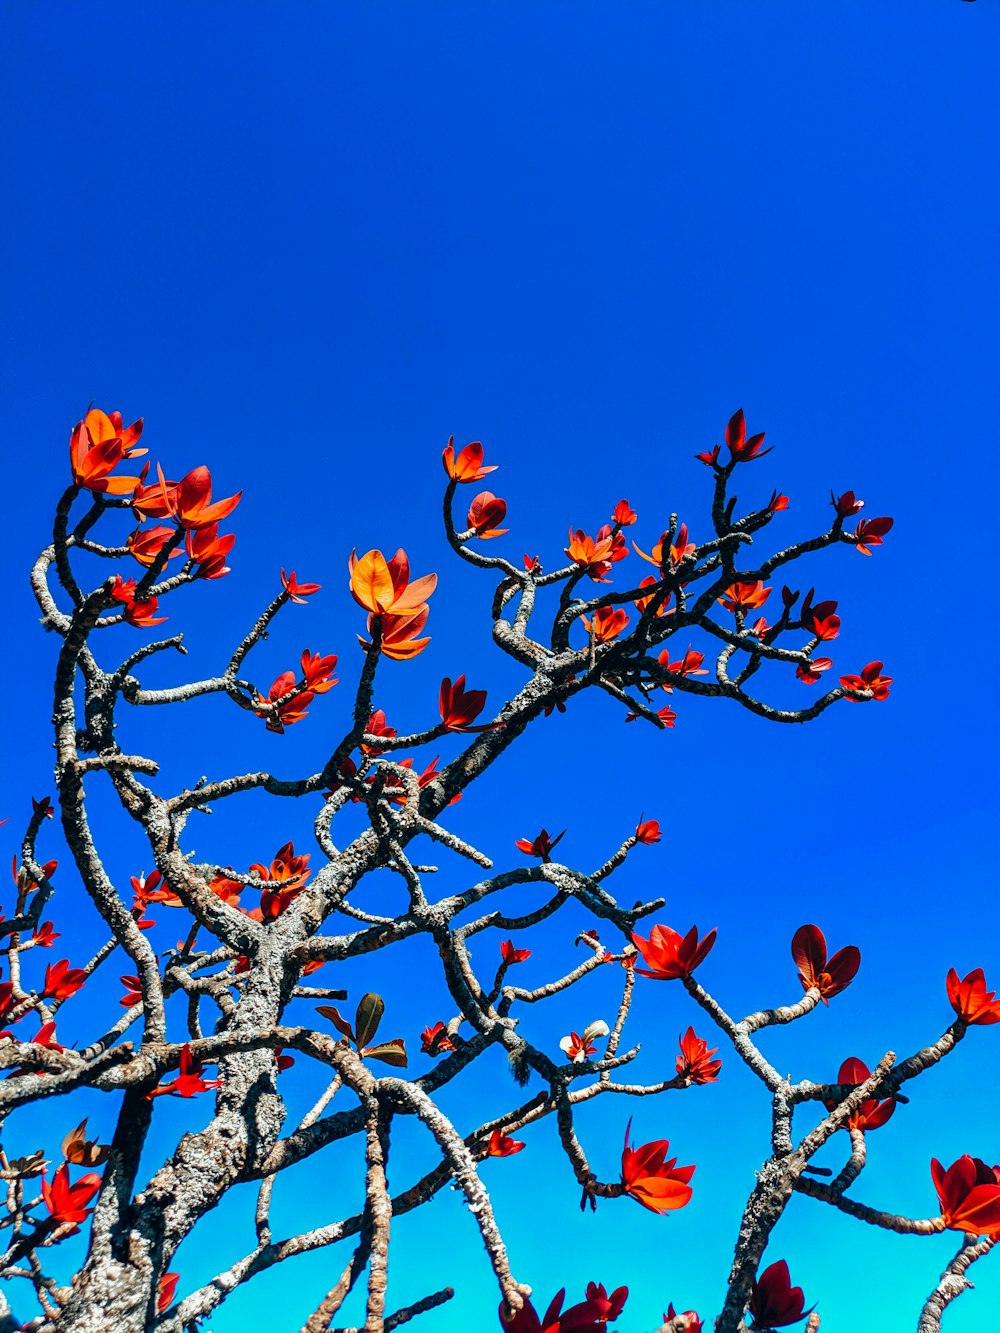 red flowers on brown tree branch during daytime